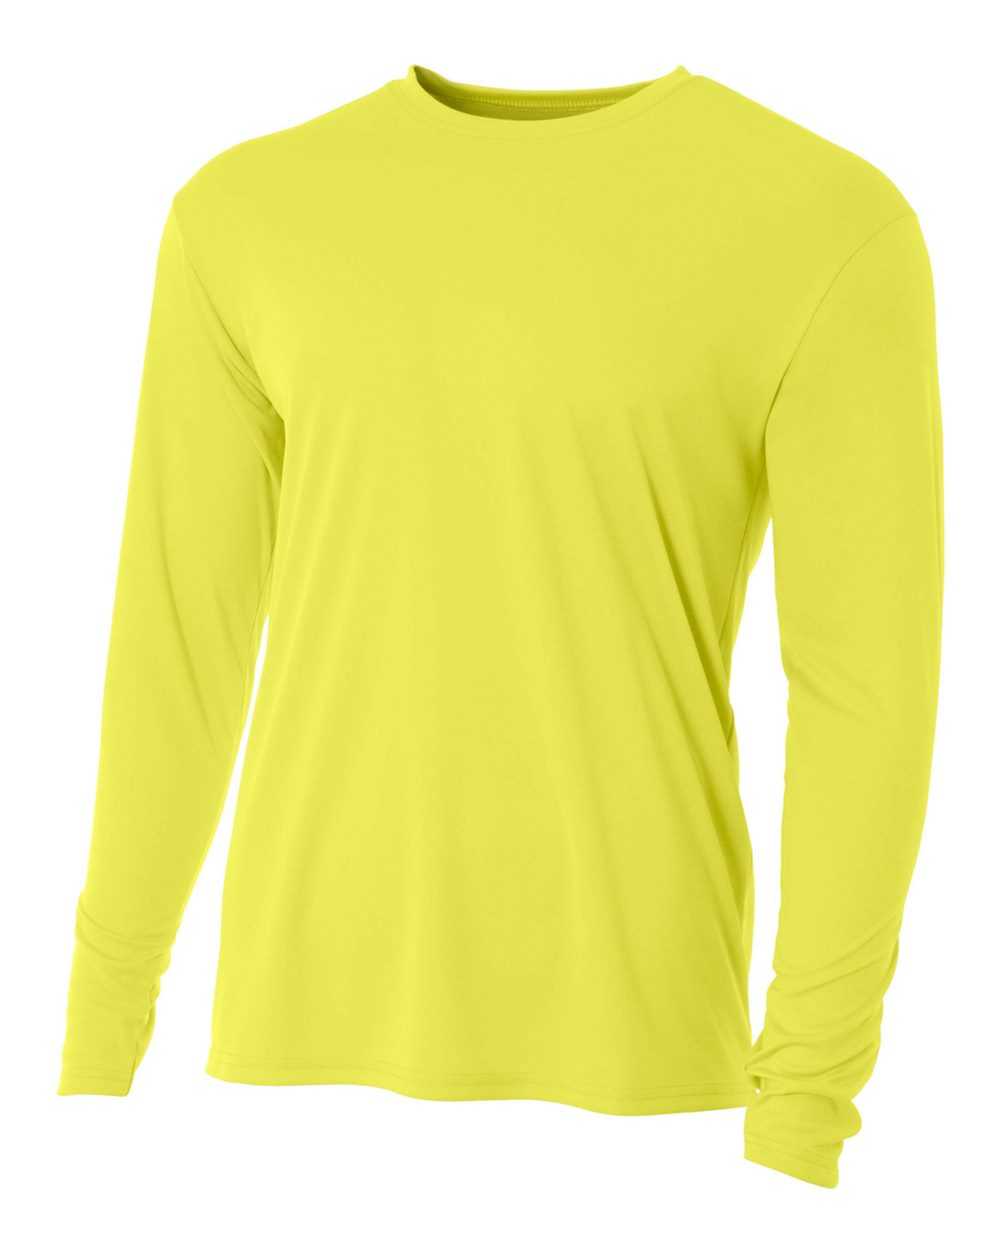 A4 N3165 Cooling Performance Long Sleeve Crew - Safety Yellow - HIT a Double